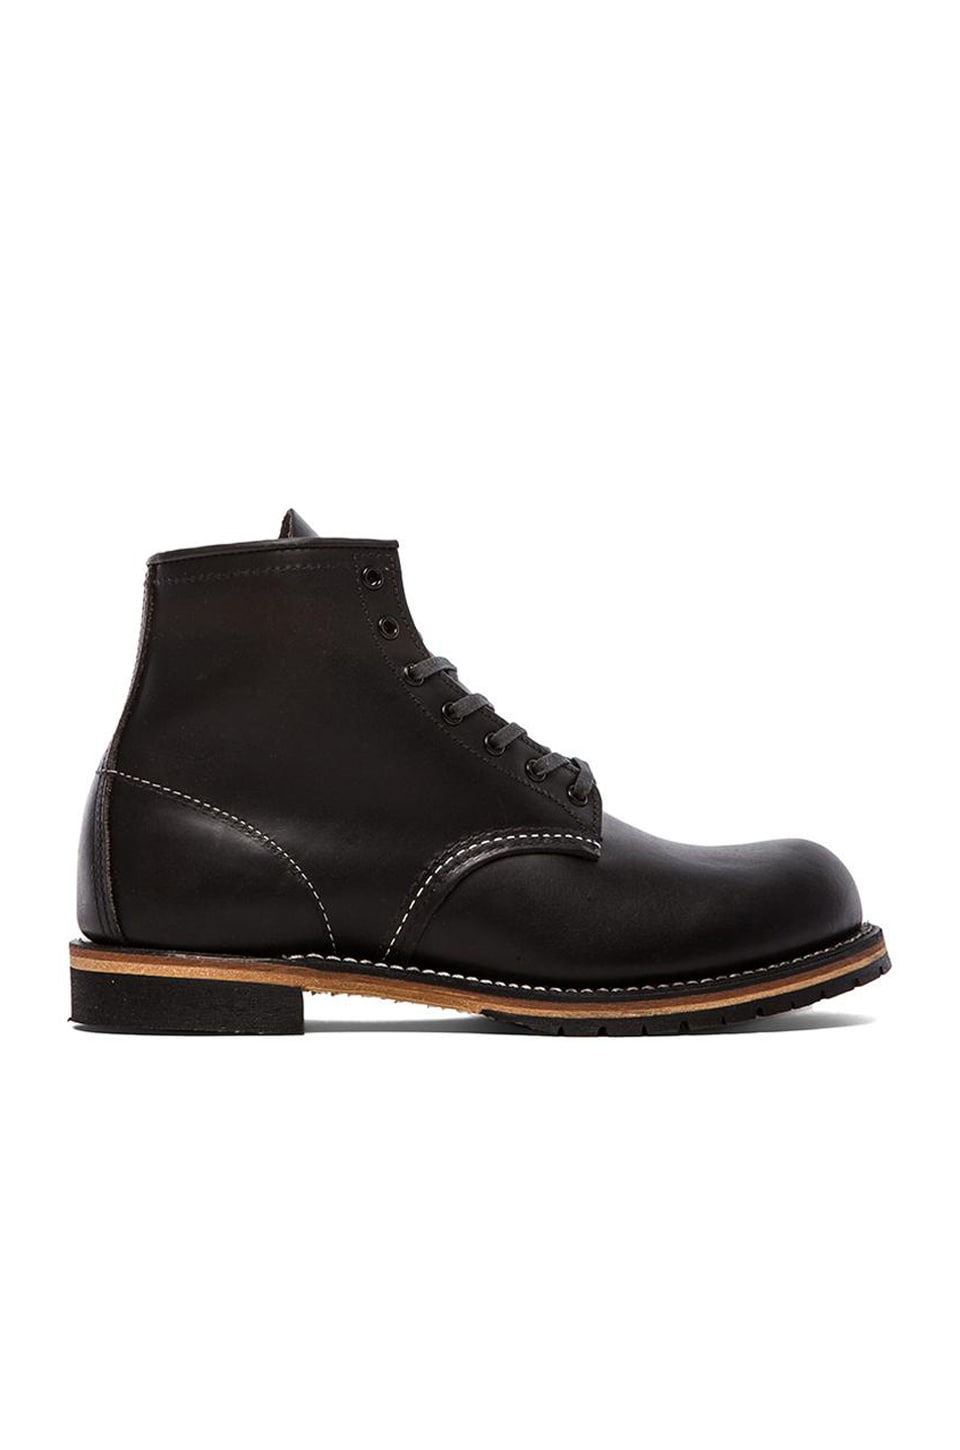 Red Wing Shoes Beckman 6